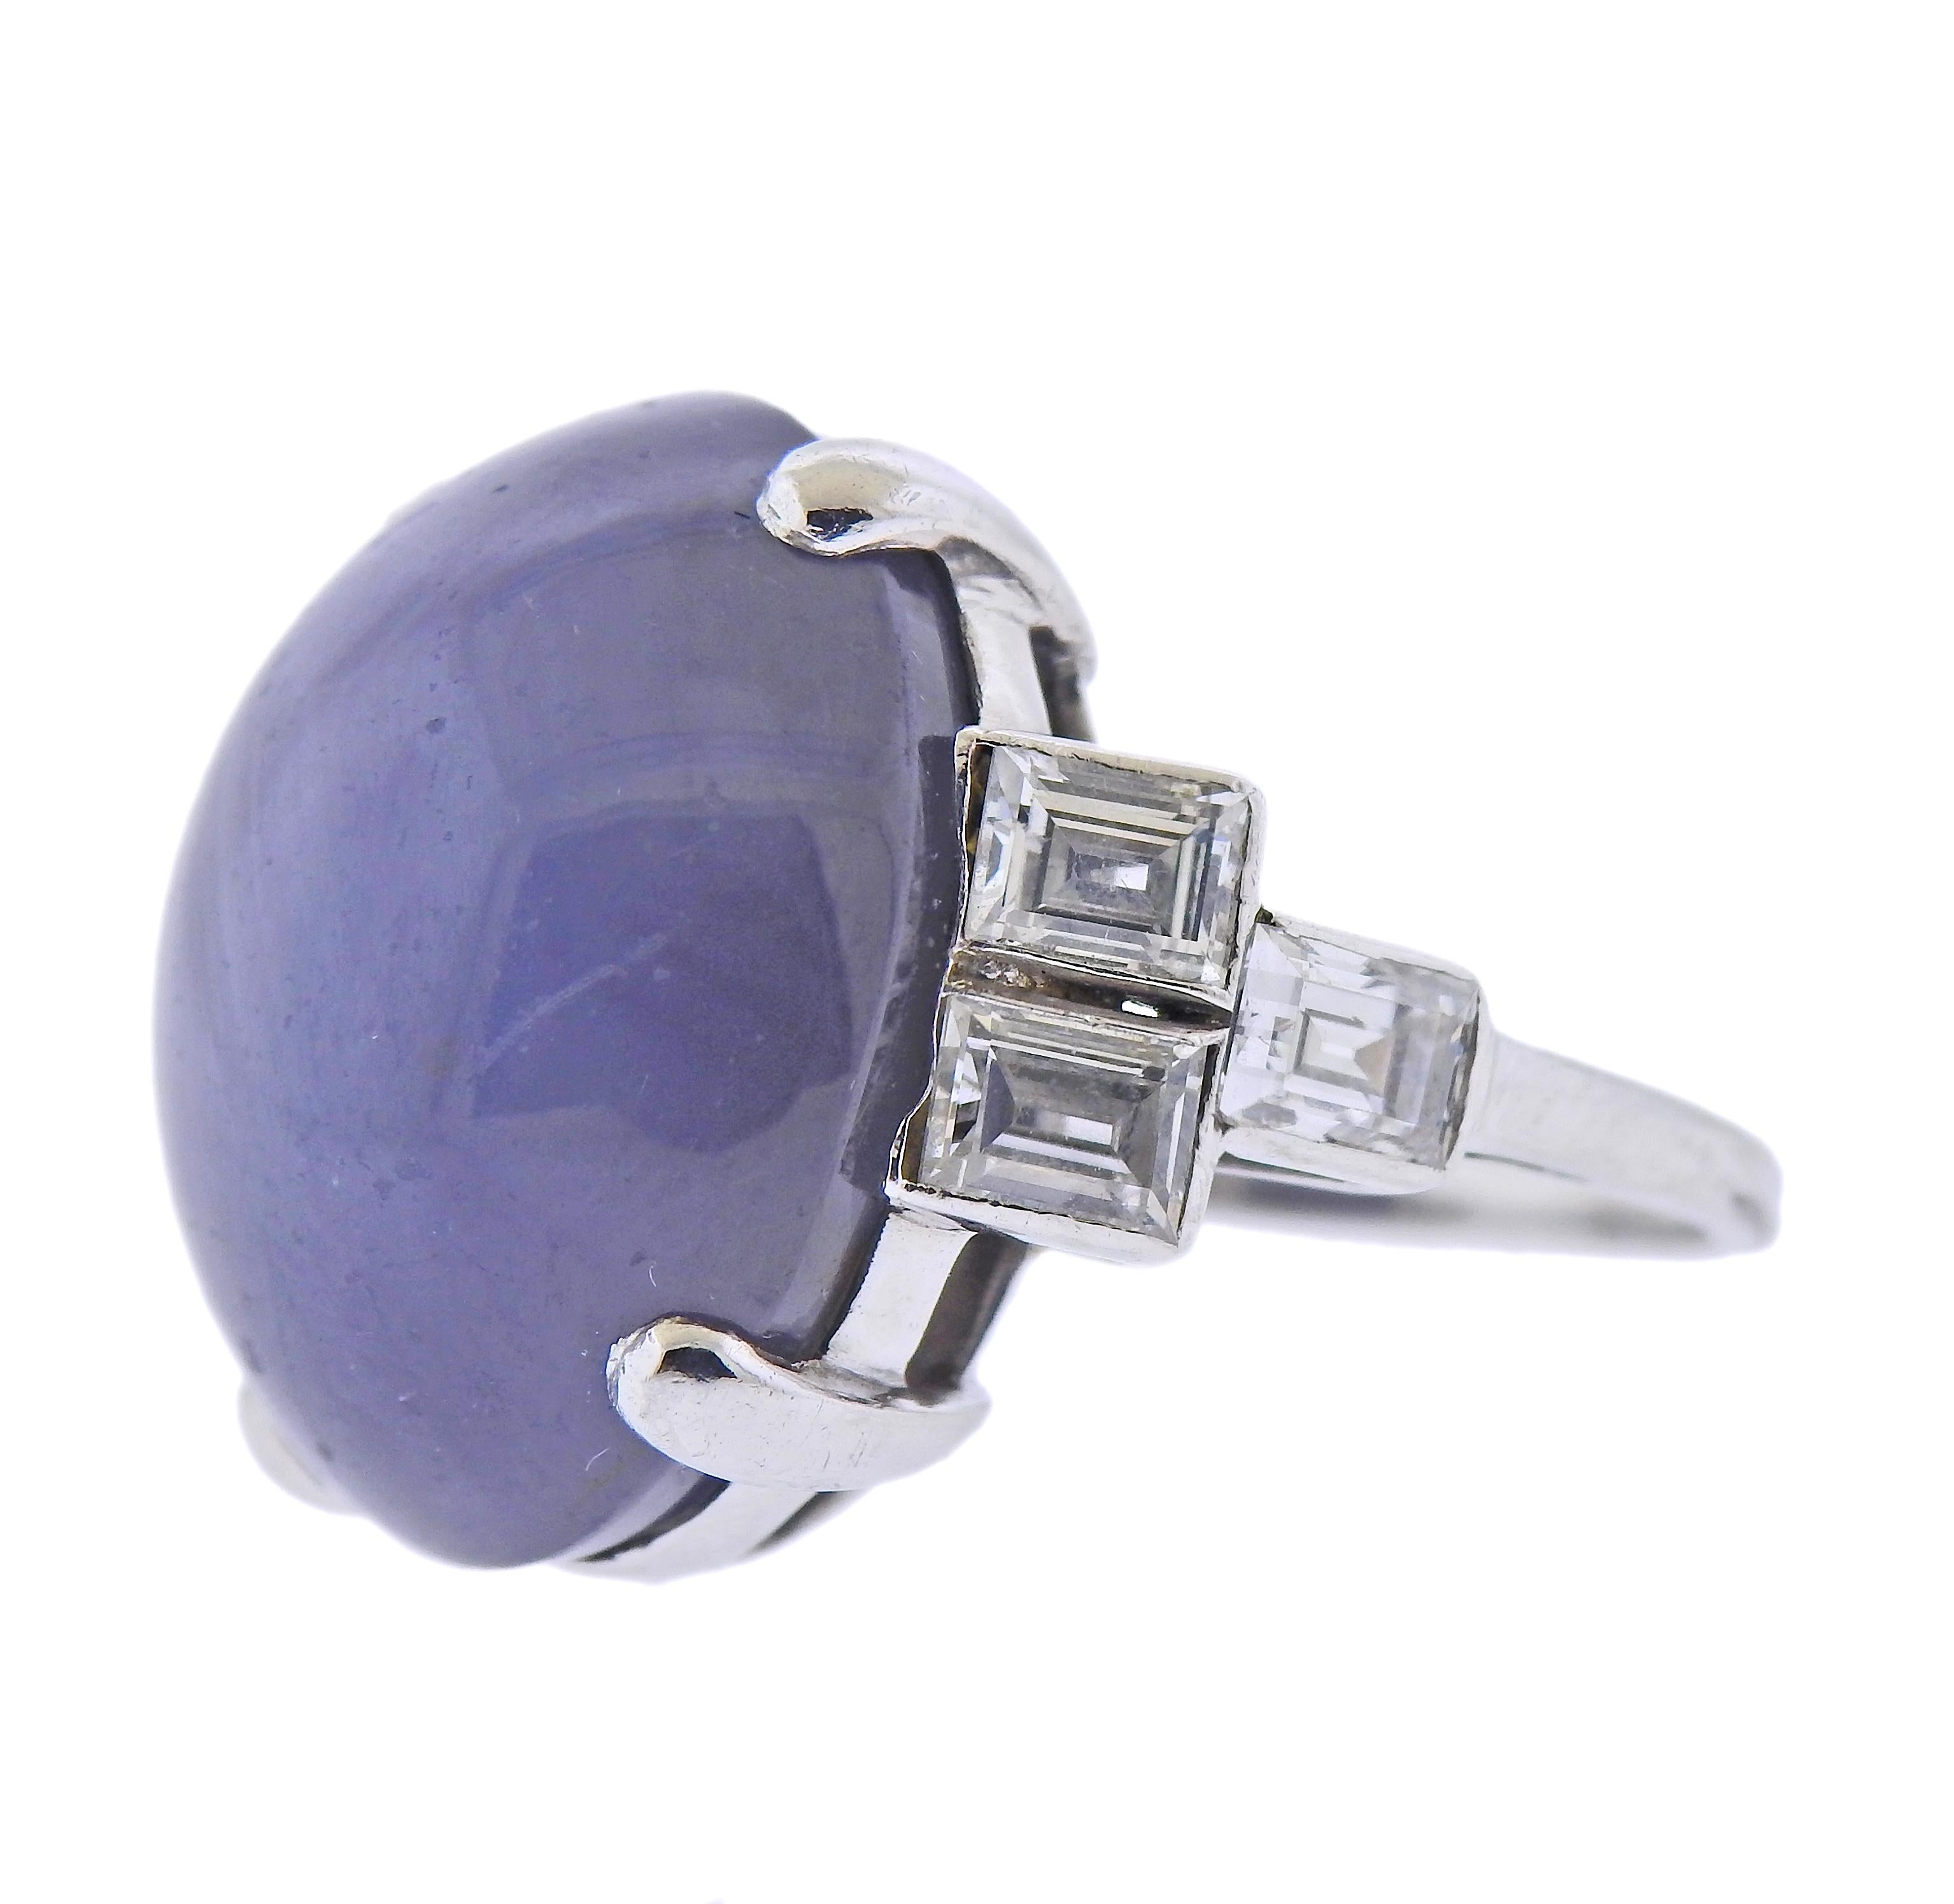 Platinum cocktail ring, with approx. 25-30ct star sapphire cabochon, surrounded with approx. 2.10ctw in diamonds (emerald cut) . Ring size - 5.75, ring top - 20mm wide. Sapphire measures 20 x 16.9 x 11.3mm (minor nicks on the top). Weight - 15.8